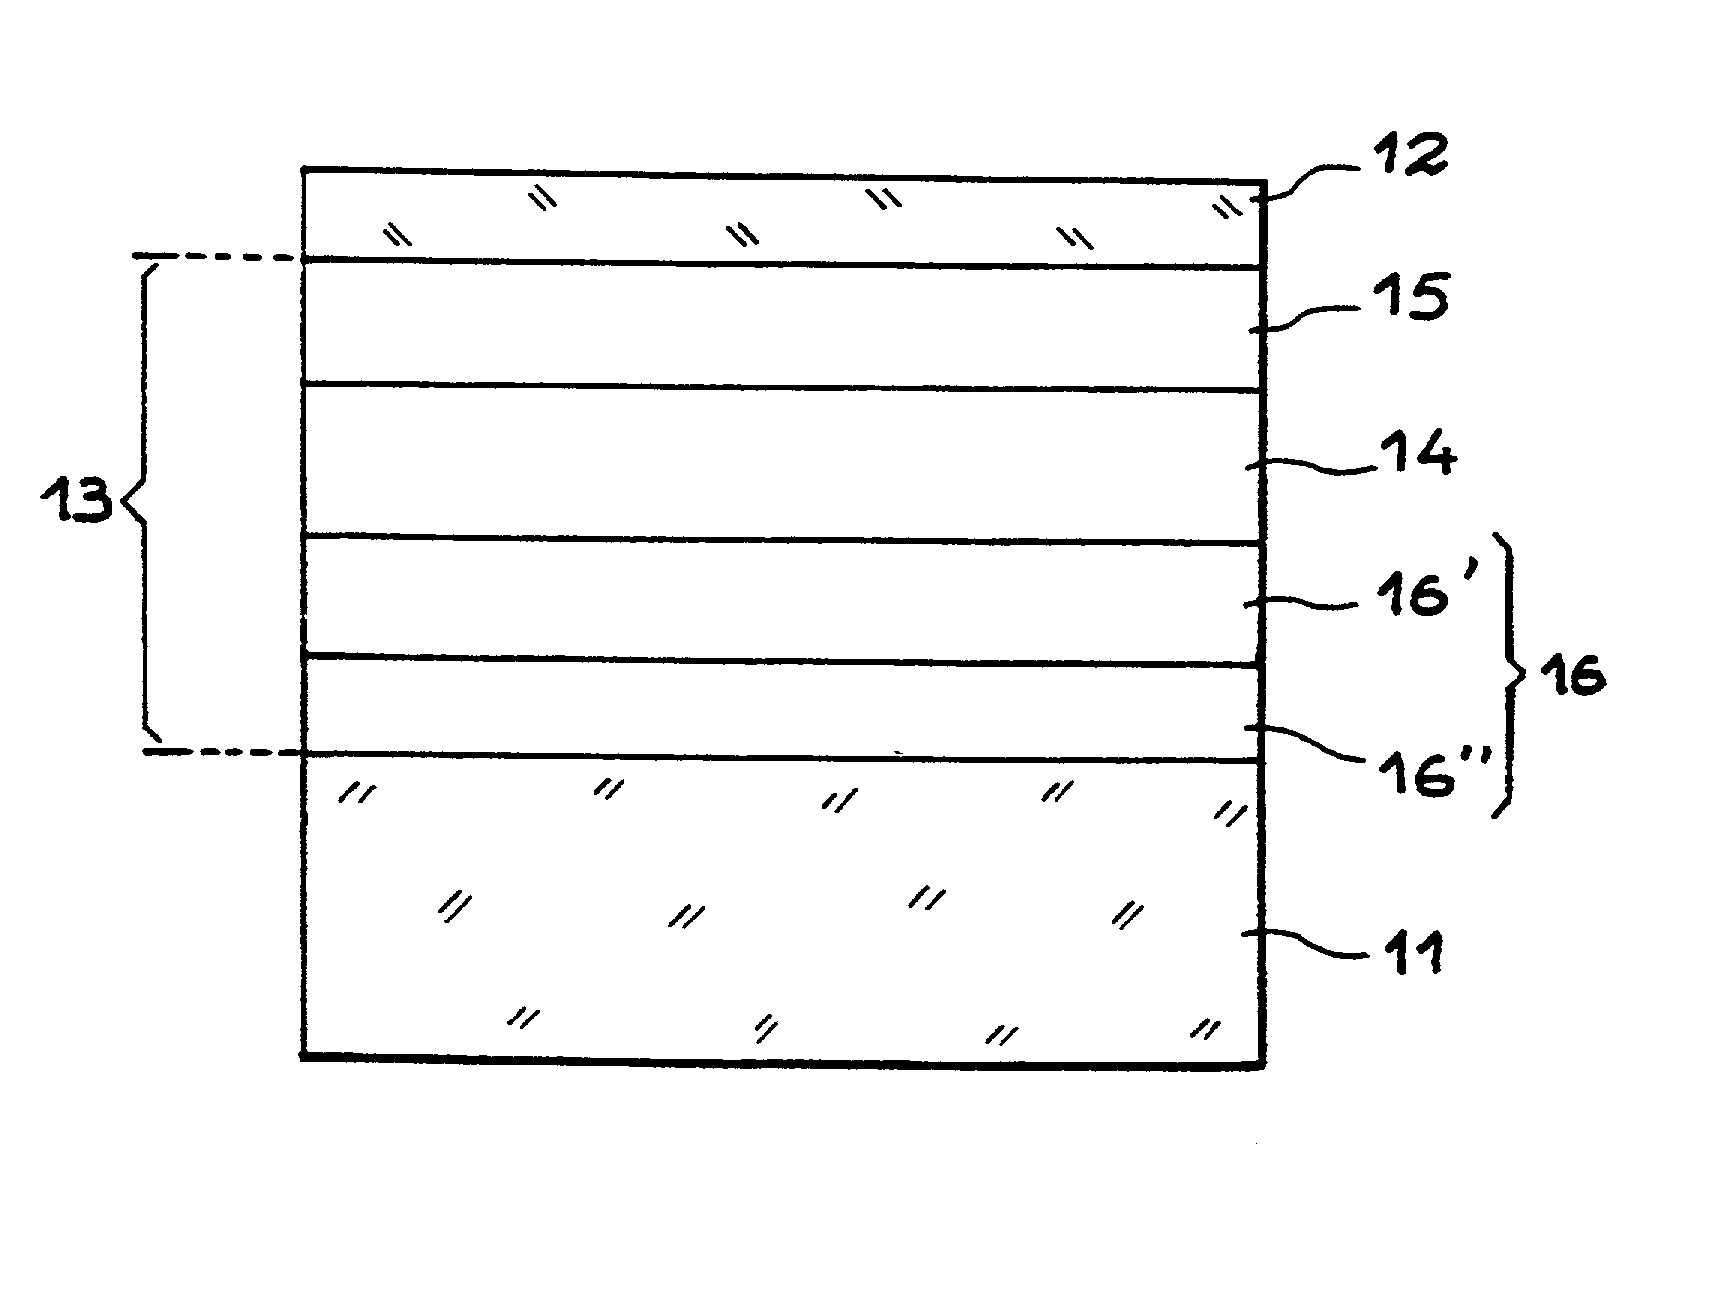 Thin layer semi-conductor structure comprising a heat distribution layer